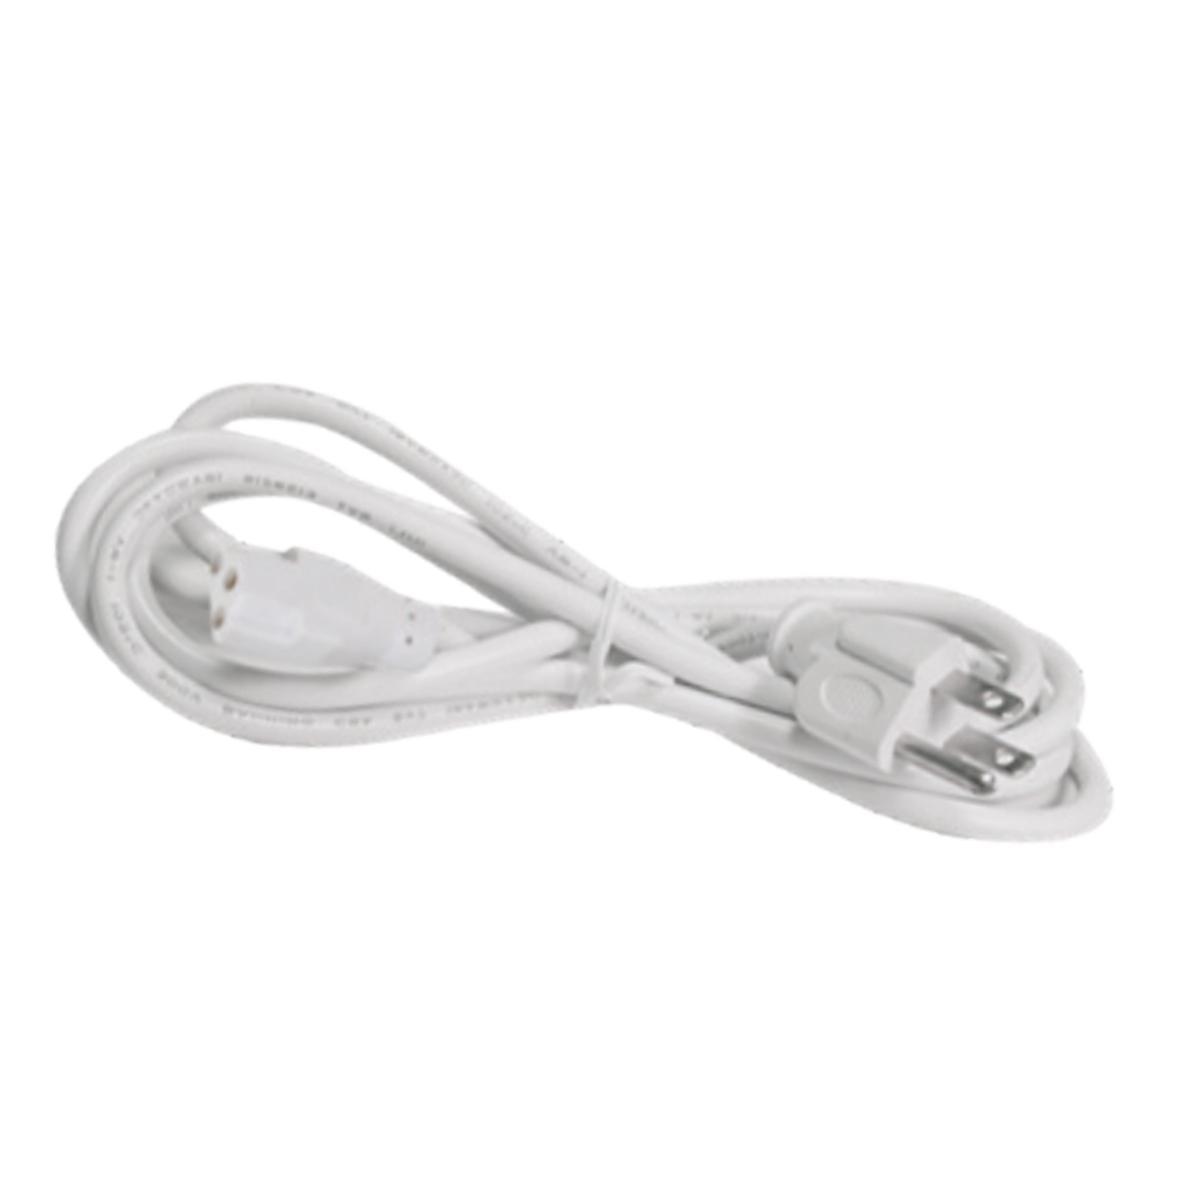 6ft Power Cable with 120V AC plug for LED 5 Complete Task Lights, White - Bees Lighting